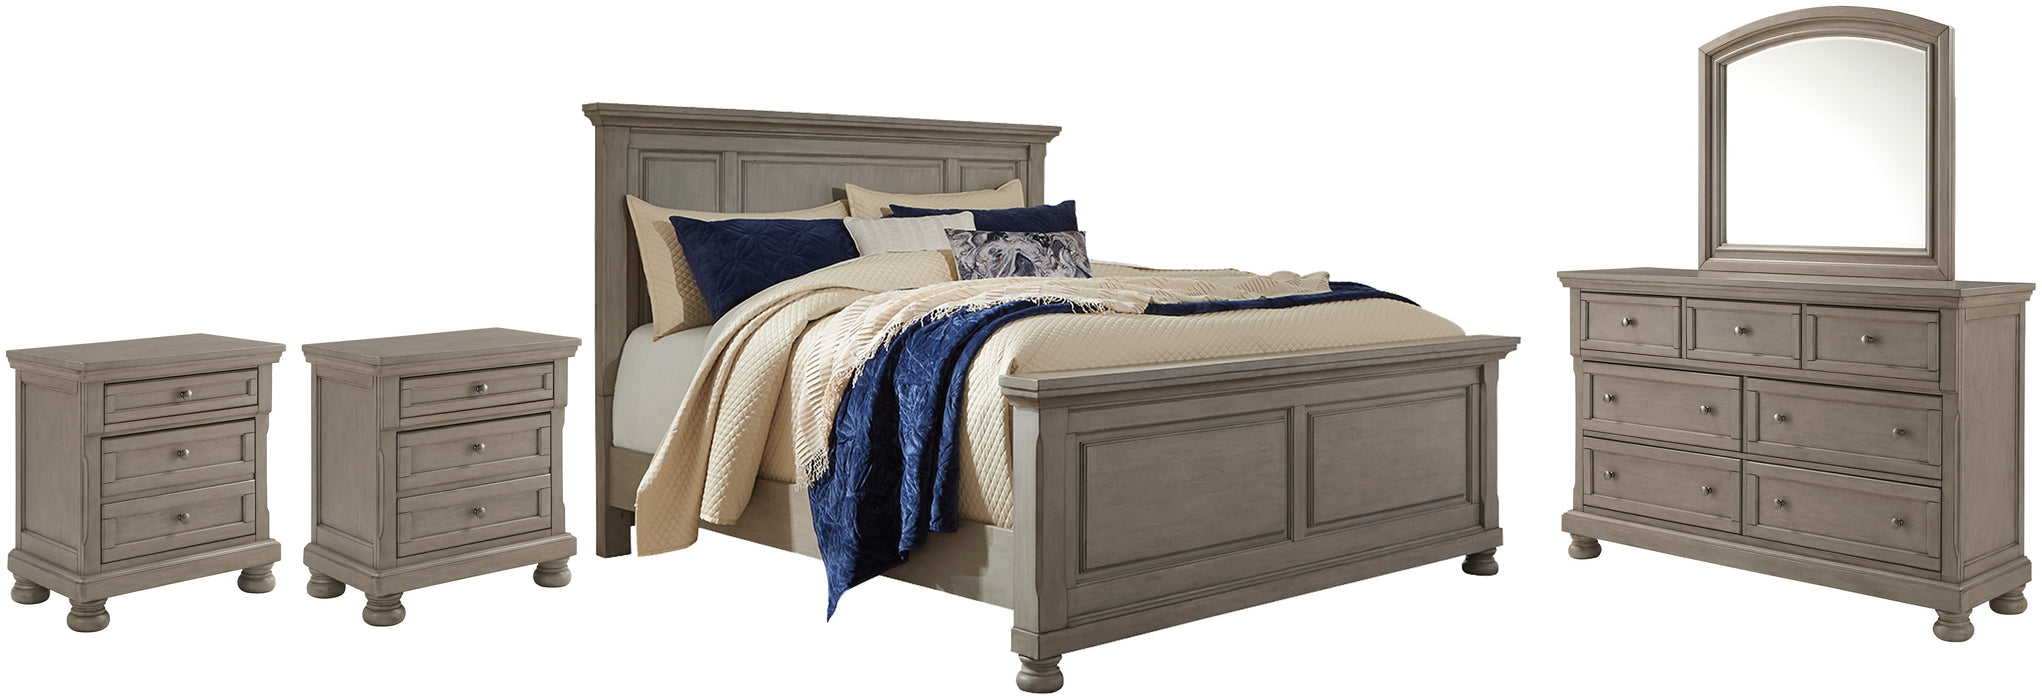 Lettner California King Panel Bed with Mirrored Dresser and 2 Nightstands JR Furniture Storefurniture, home furniture, home decor